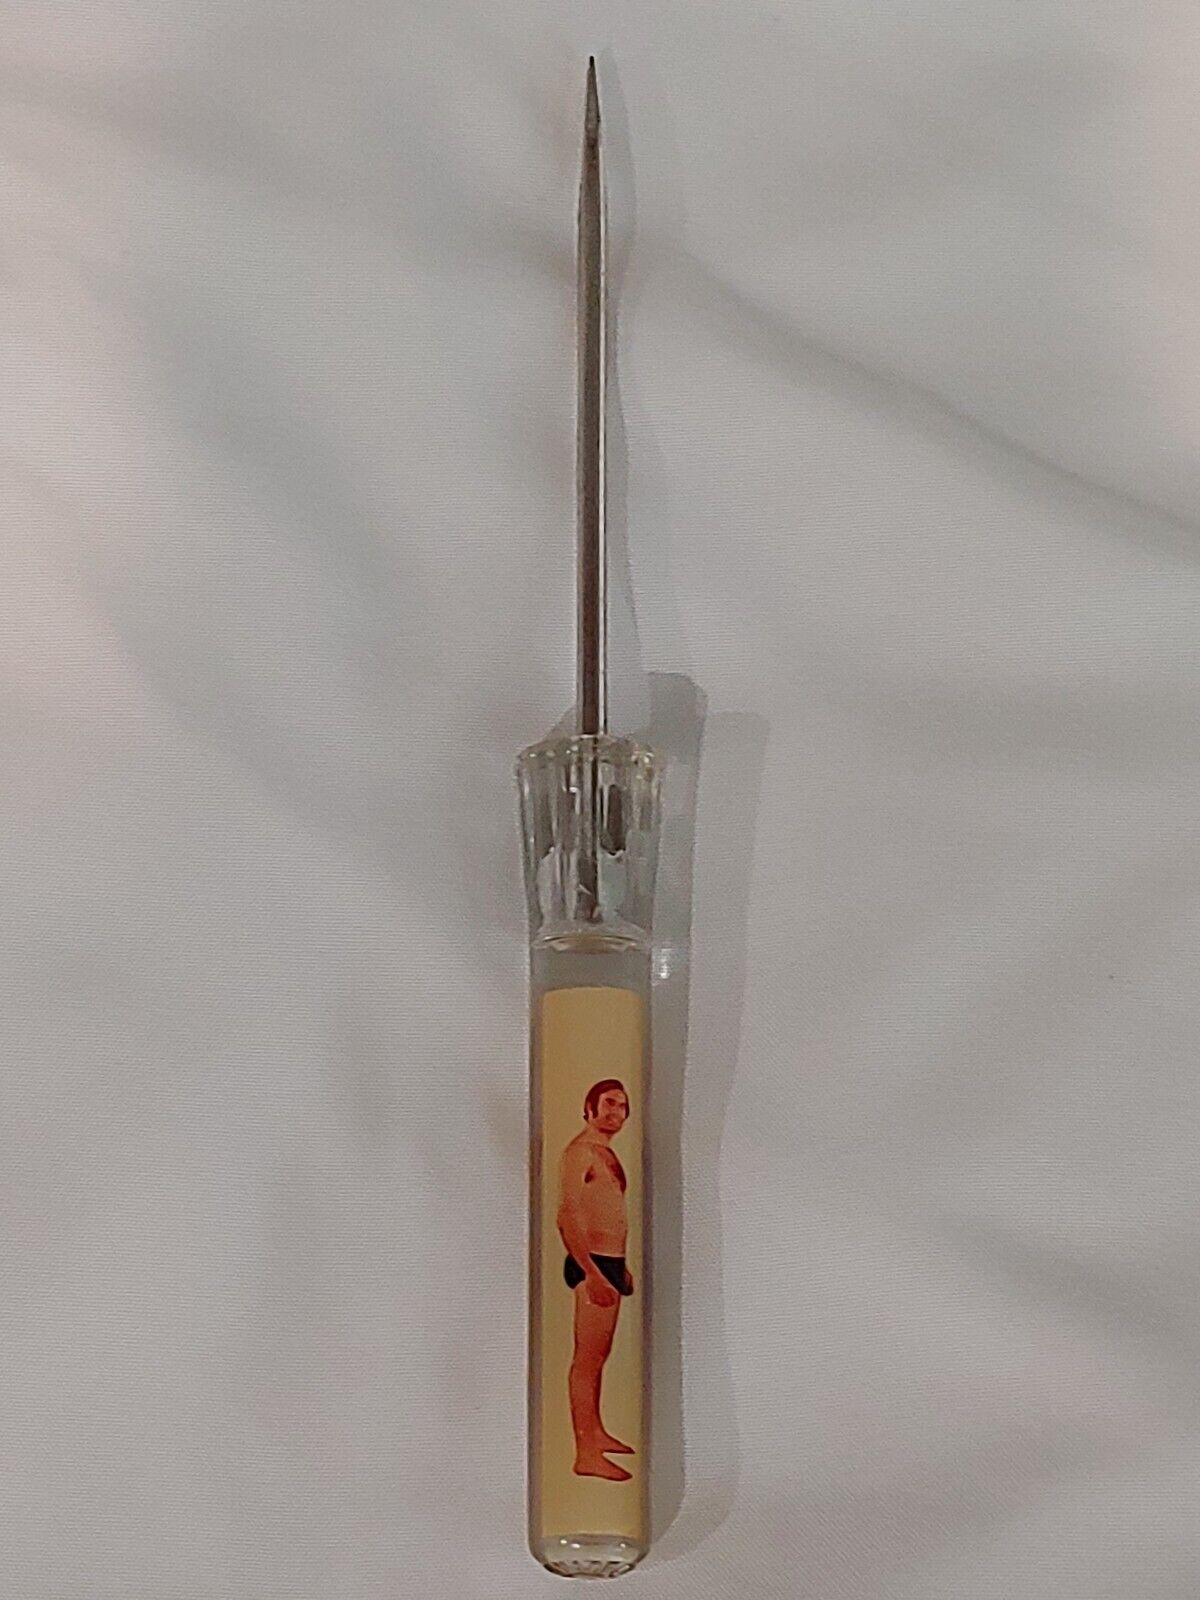 ONE Vintage Tip and N Strip Floaty Screwdriver-Made in Denmark - 1 FEMALE 1 MALE